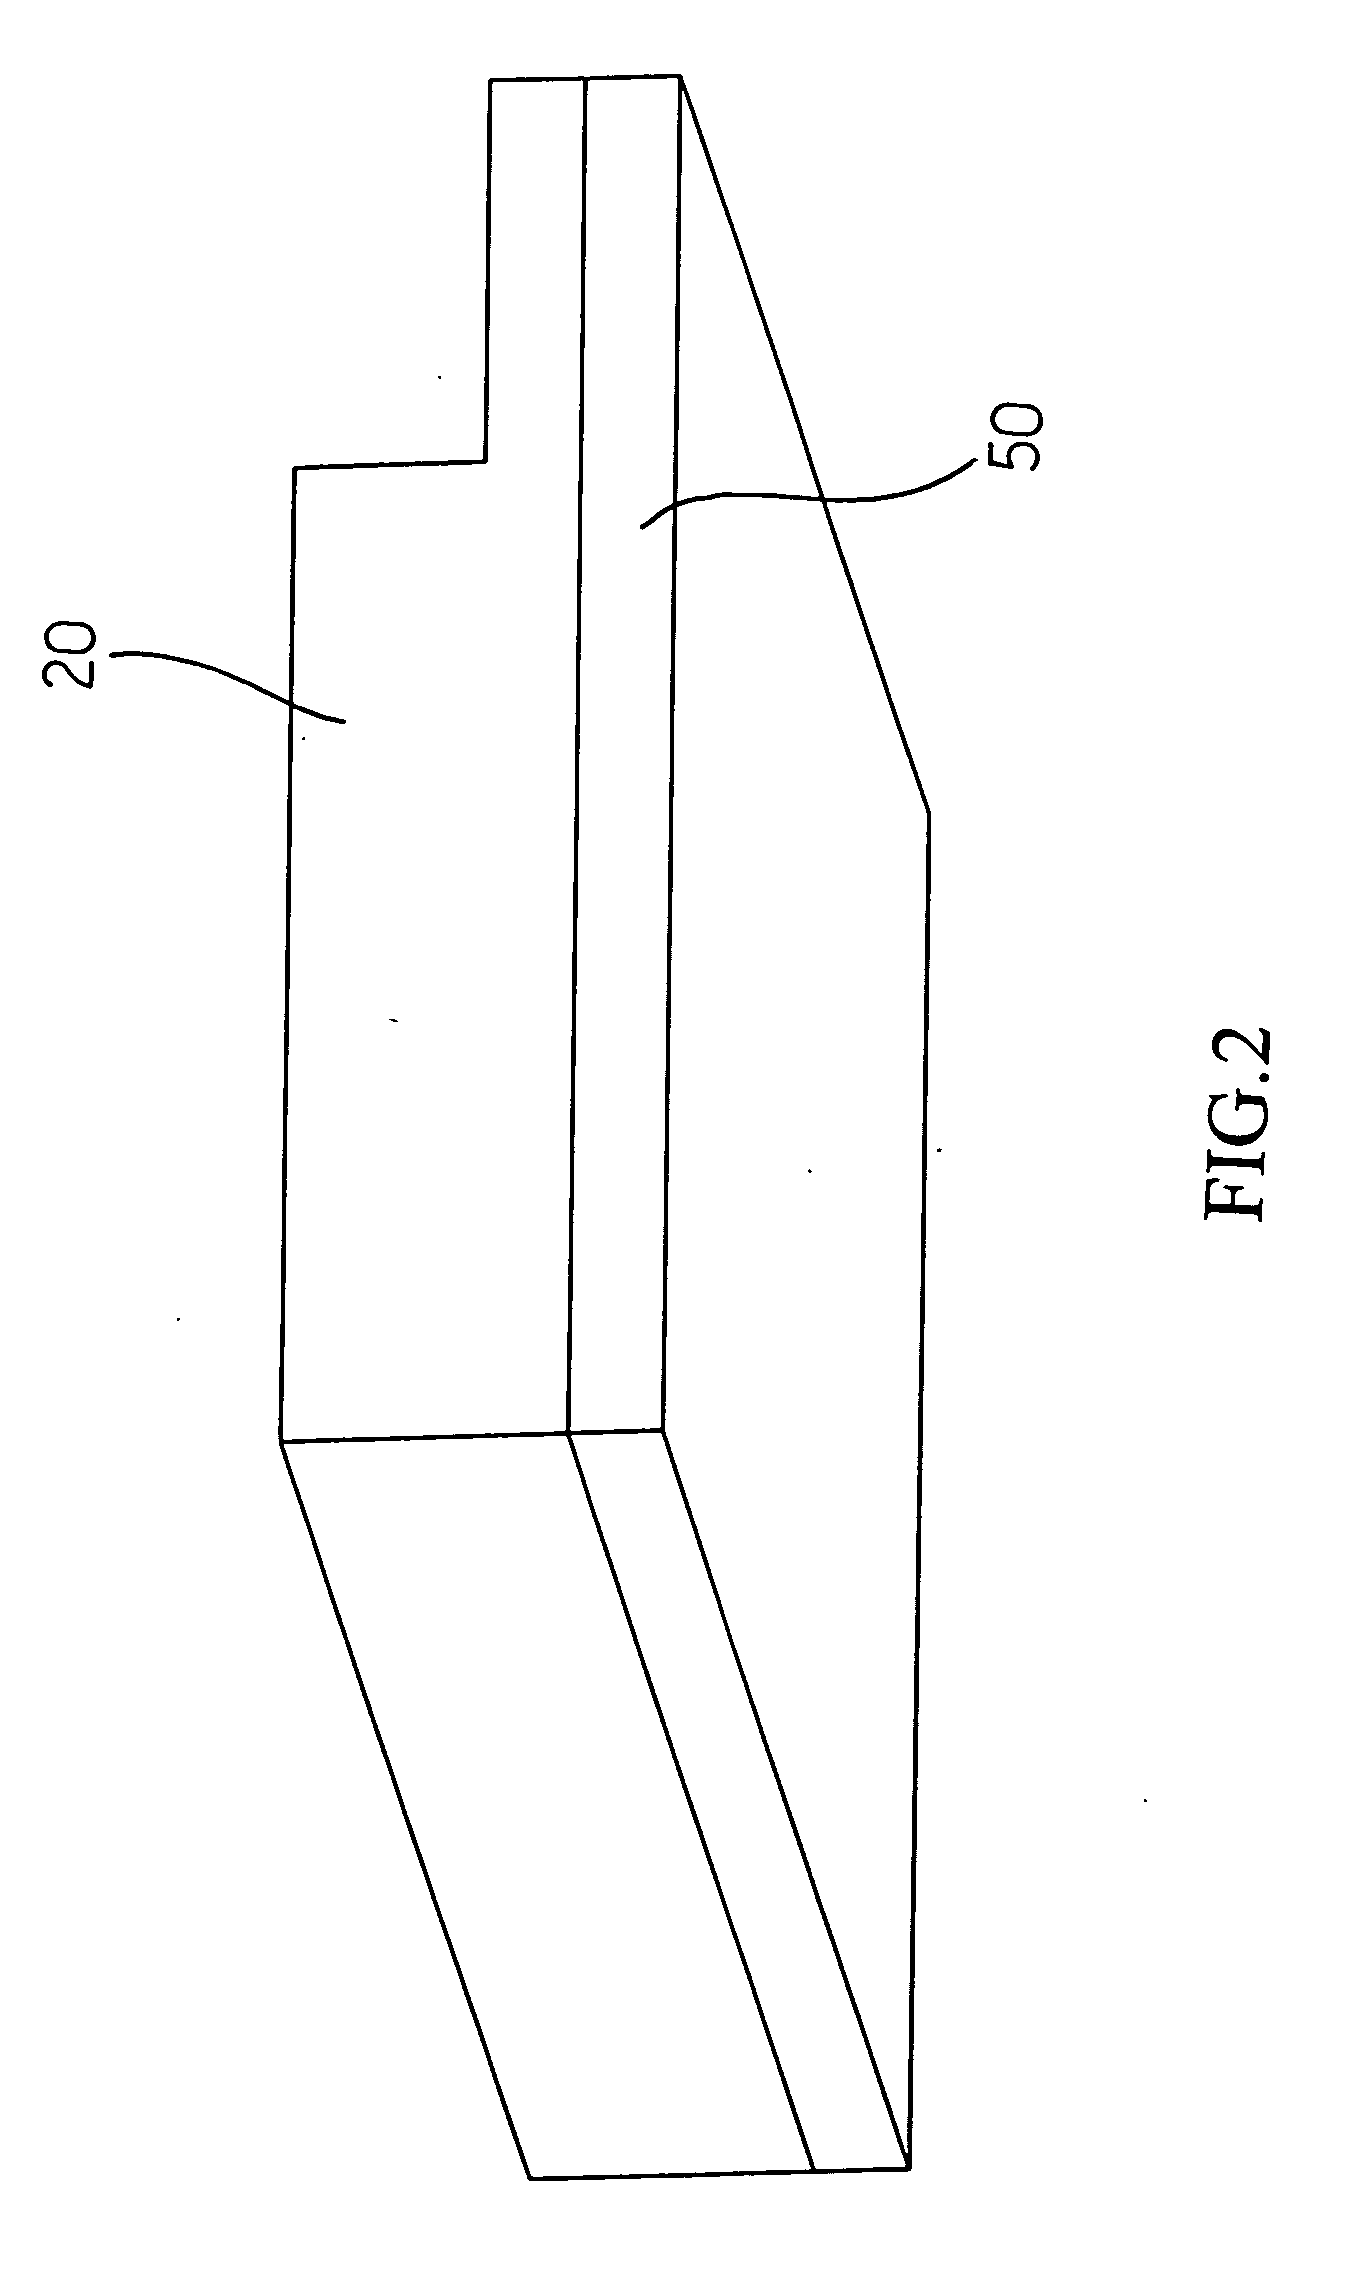 Multiple-wavelength light emitting diode and its light emitting chip structure